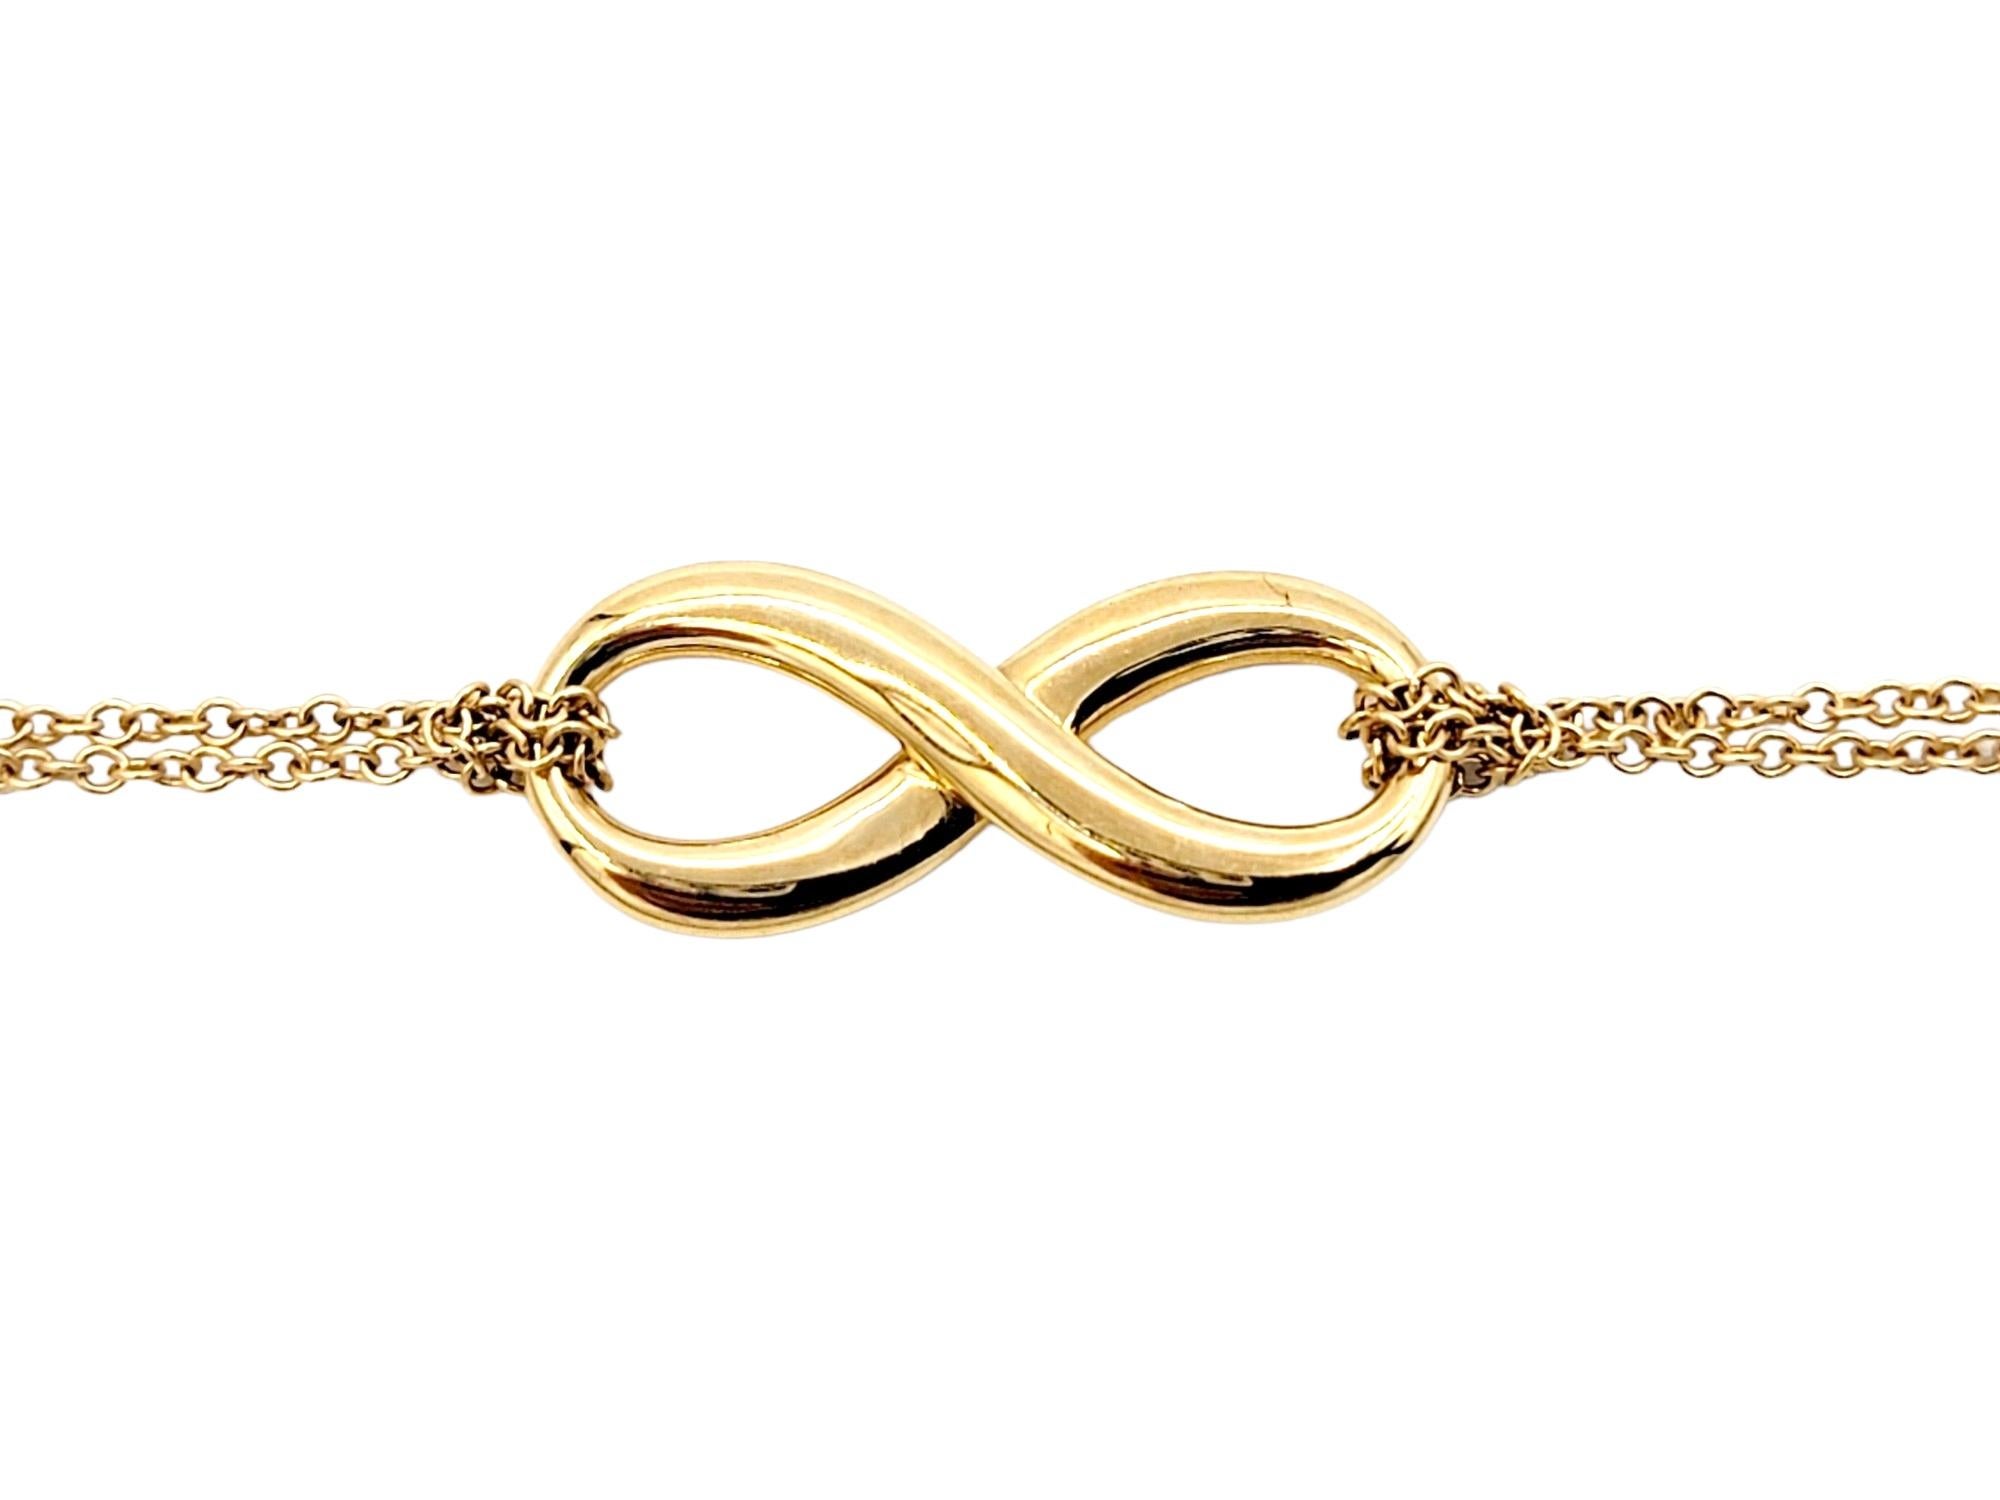 This lovely and delicate Tiffany & Co. infinity chain bracelet will stand the test of time. Founded in 1837 in New York City, Tiffany & Co. is one of the world's most storied luxury design houses recognized globally for its innovative jewelry